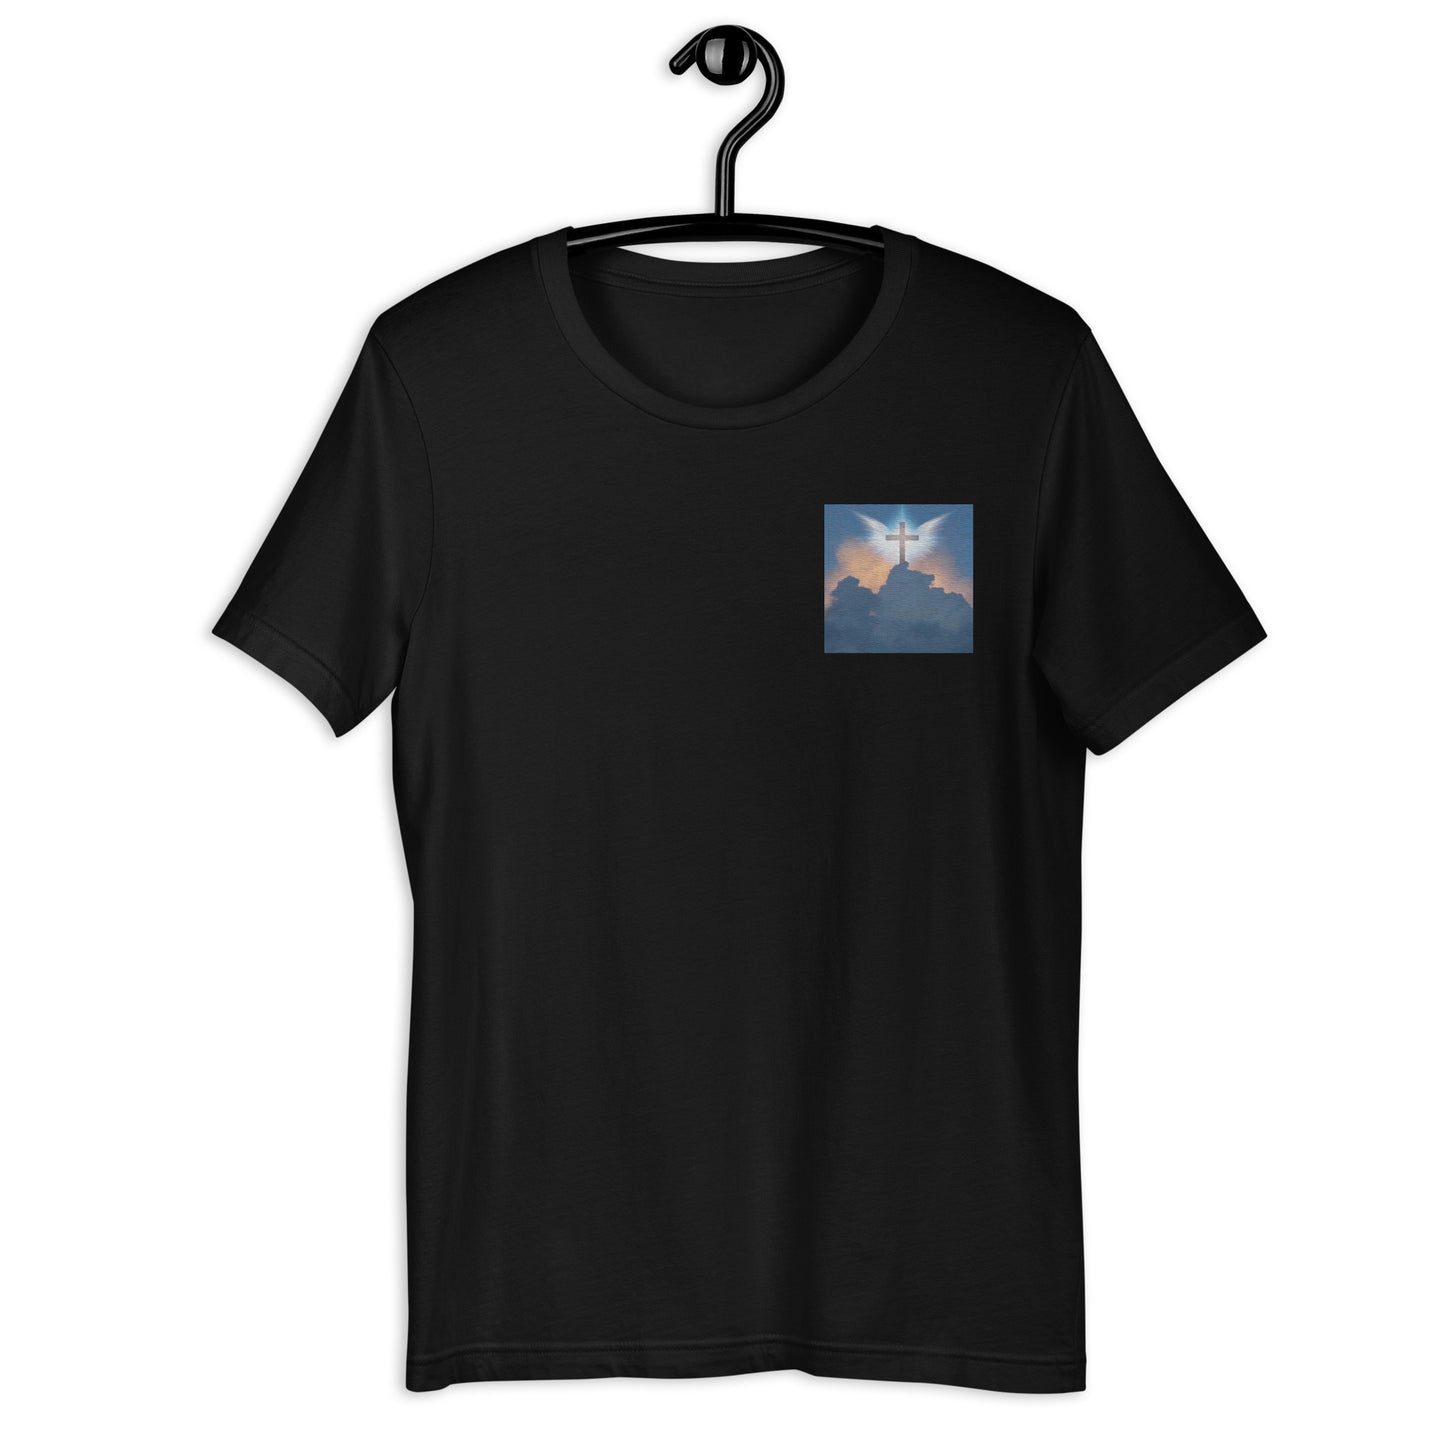 Embroidered Cross on Clouds T shirt